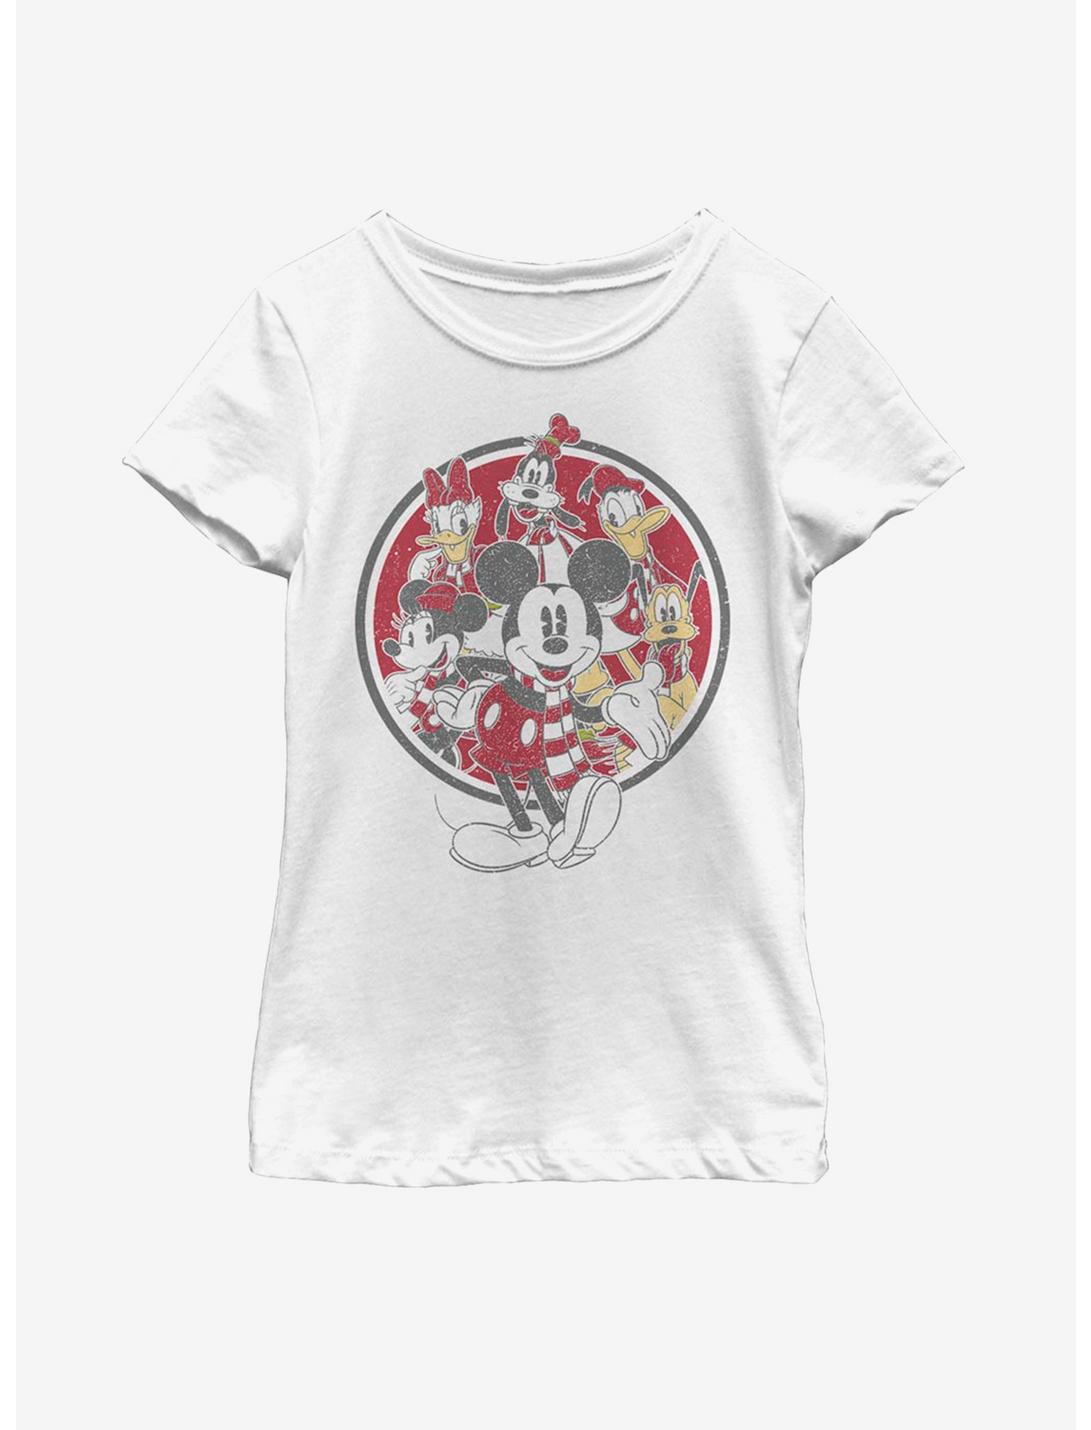 Disney Mickey Mouse Vintage Mickey Friends Youth Girls T-Shirt, WHITE, hi-res